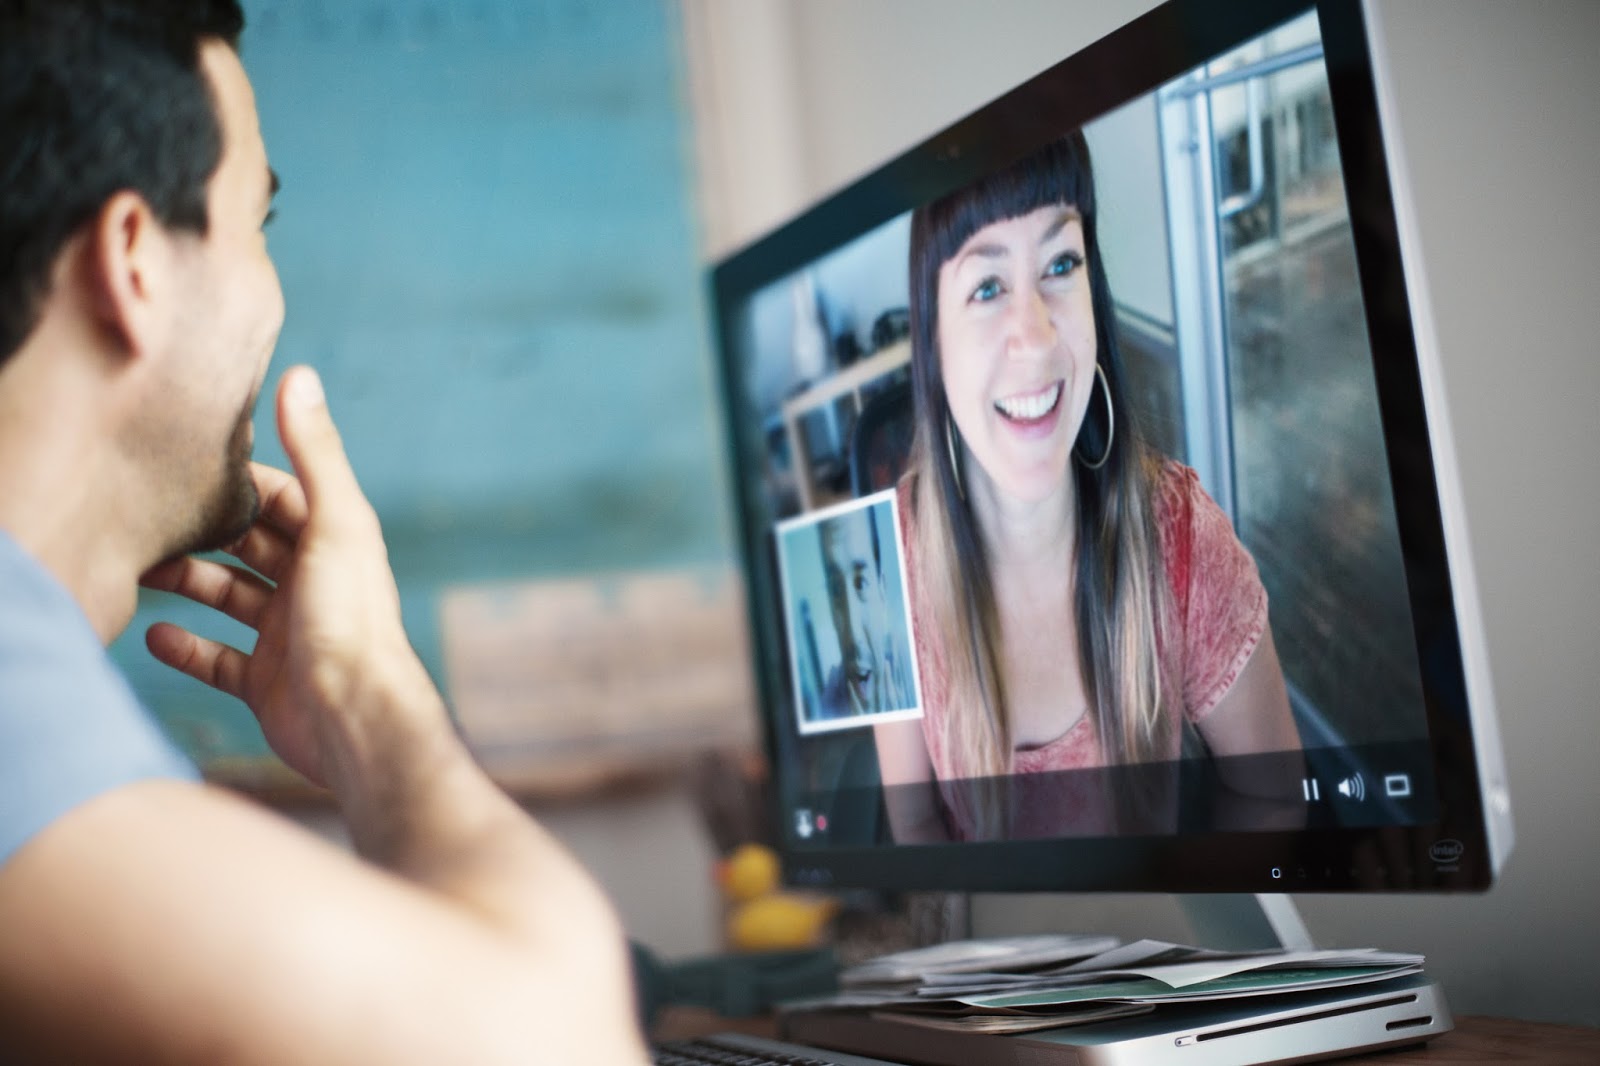 Your Complete Guide For The Perfect Virtual Date On Webcam